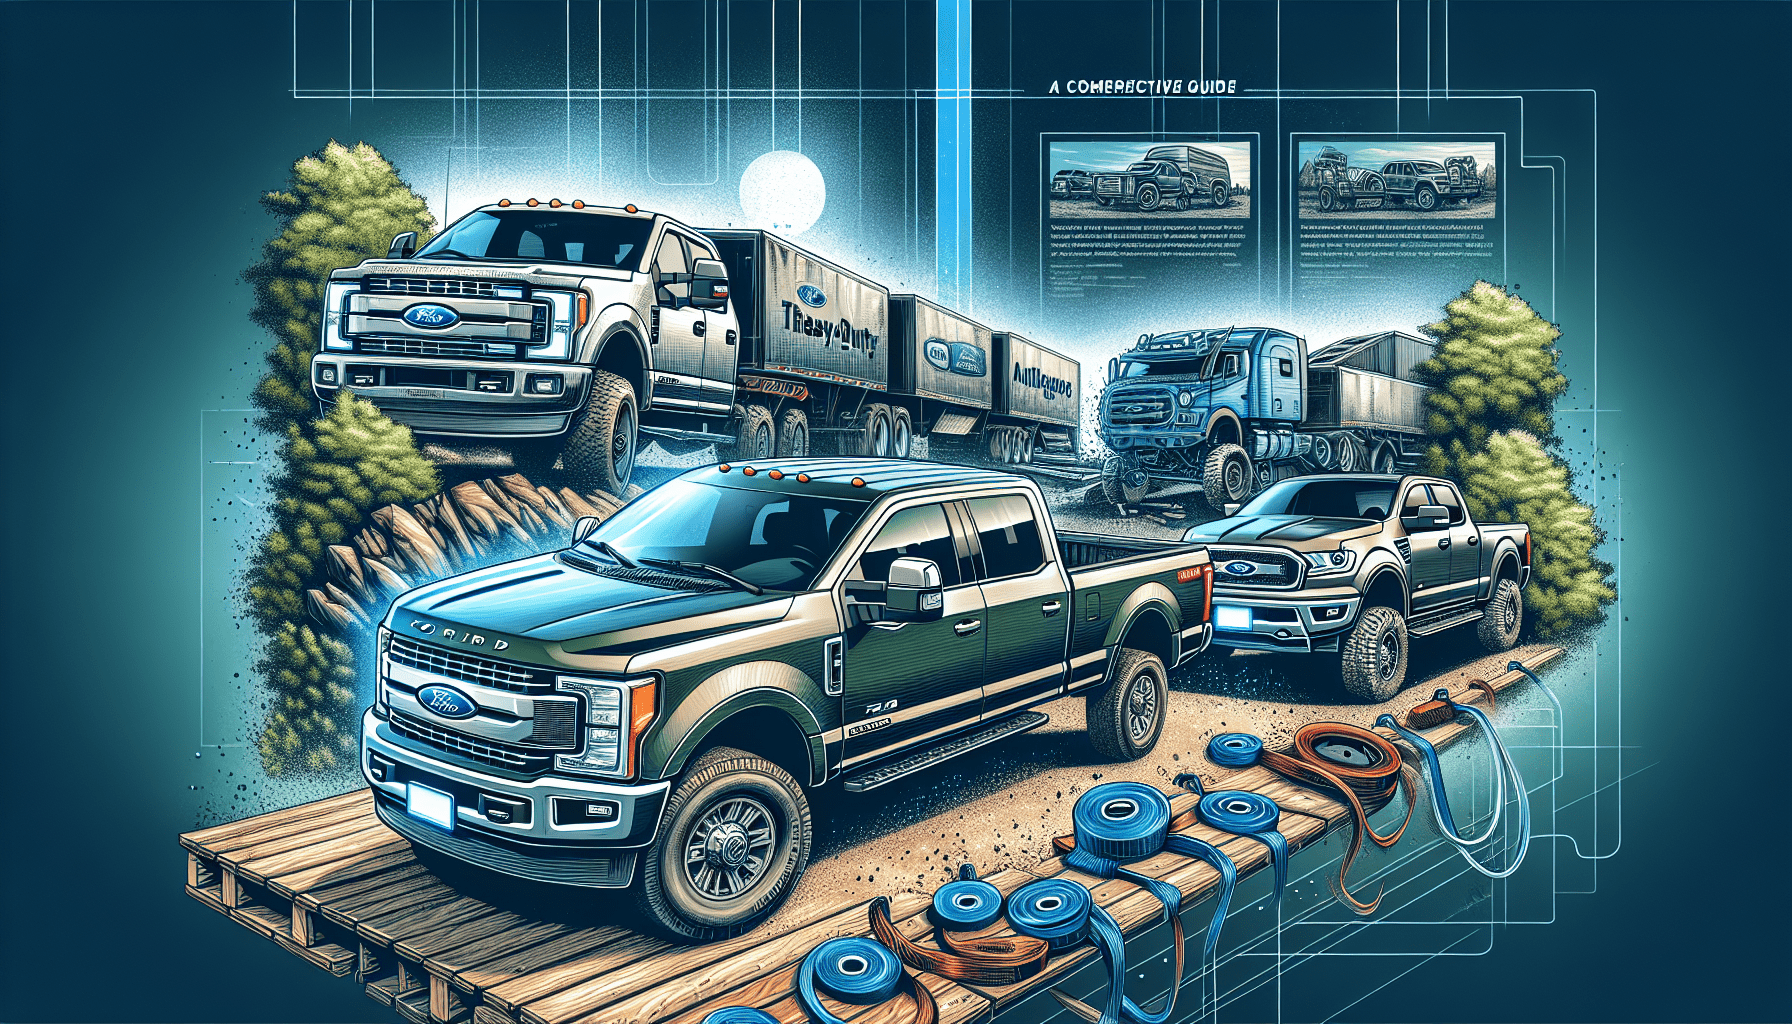 The Best Ford Trucks For Towing And Hauling: A Comprehensive Guide